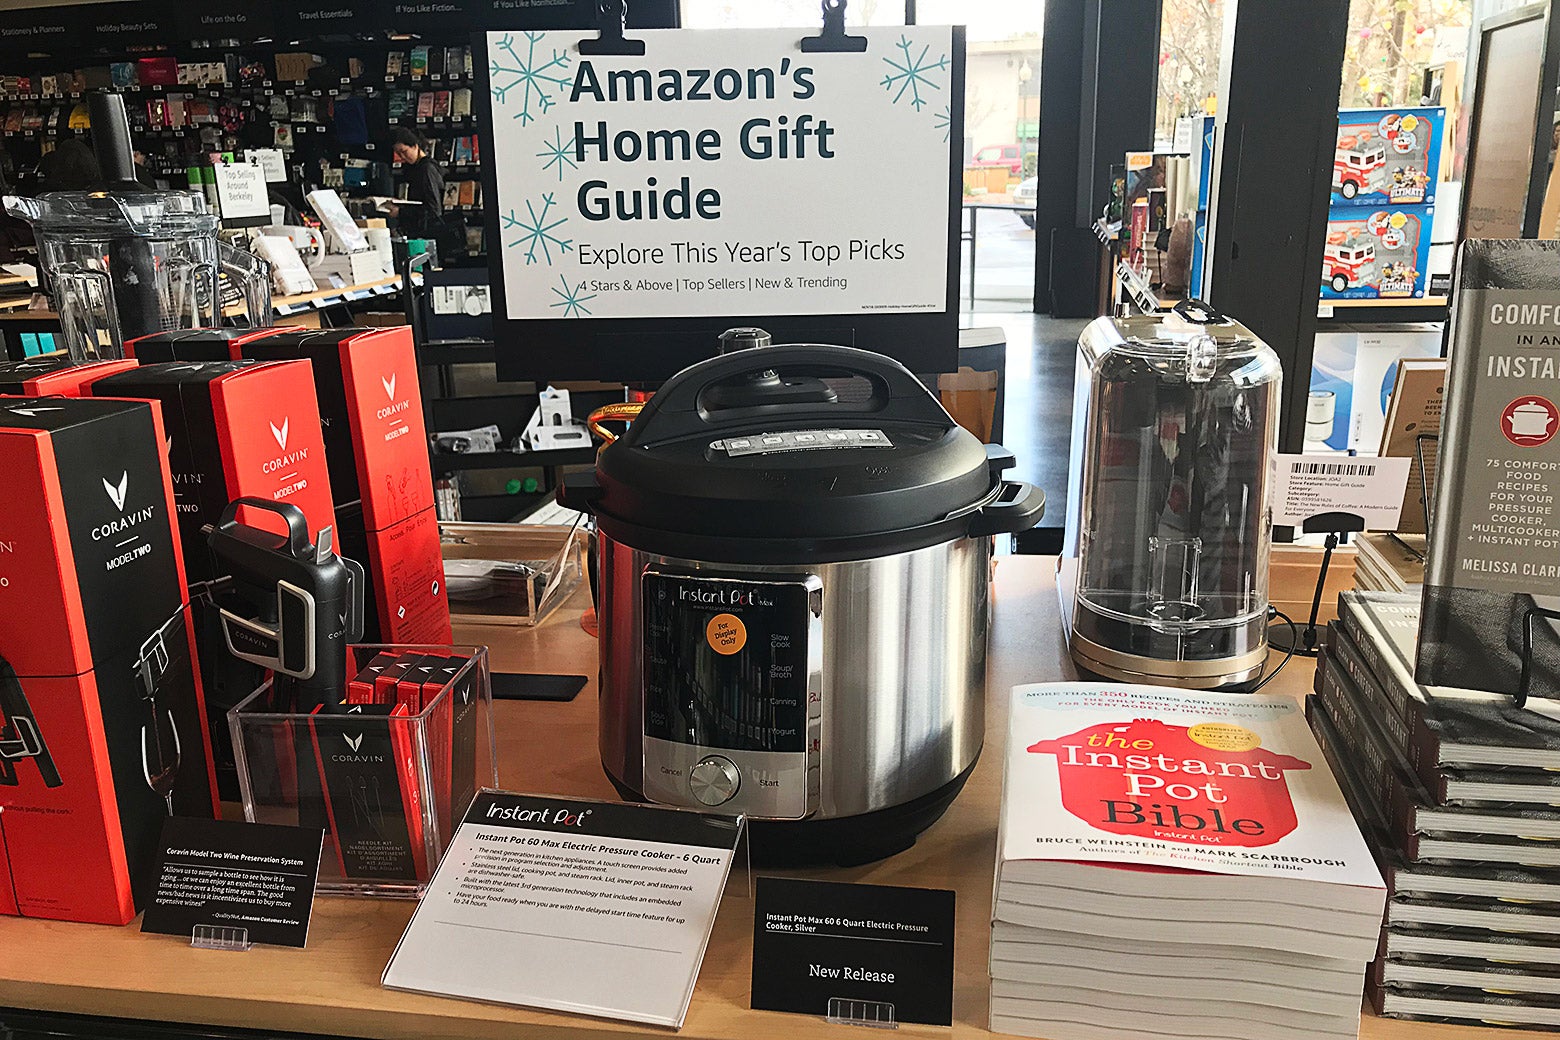 A sign says "Amazon's Home Gift Guide" over an Instant Pot, other kitchen gadgets, and books.